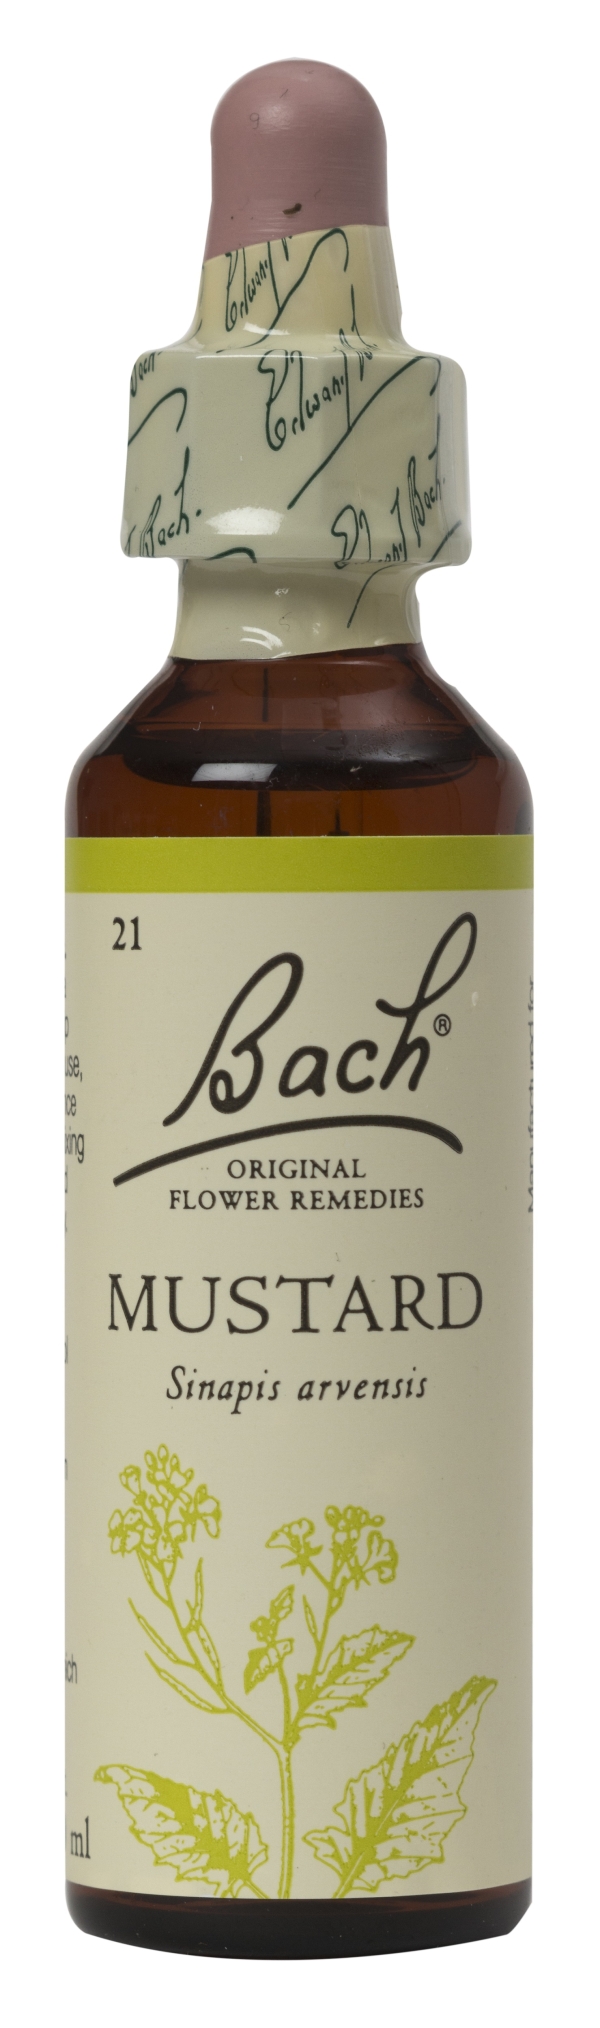 Nelson Bach Flower Remedies: Bach Mustard Flower Remedy (20ml) available online here